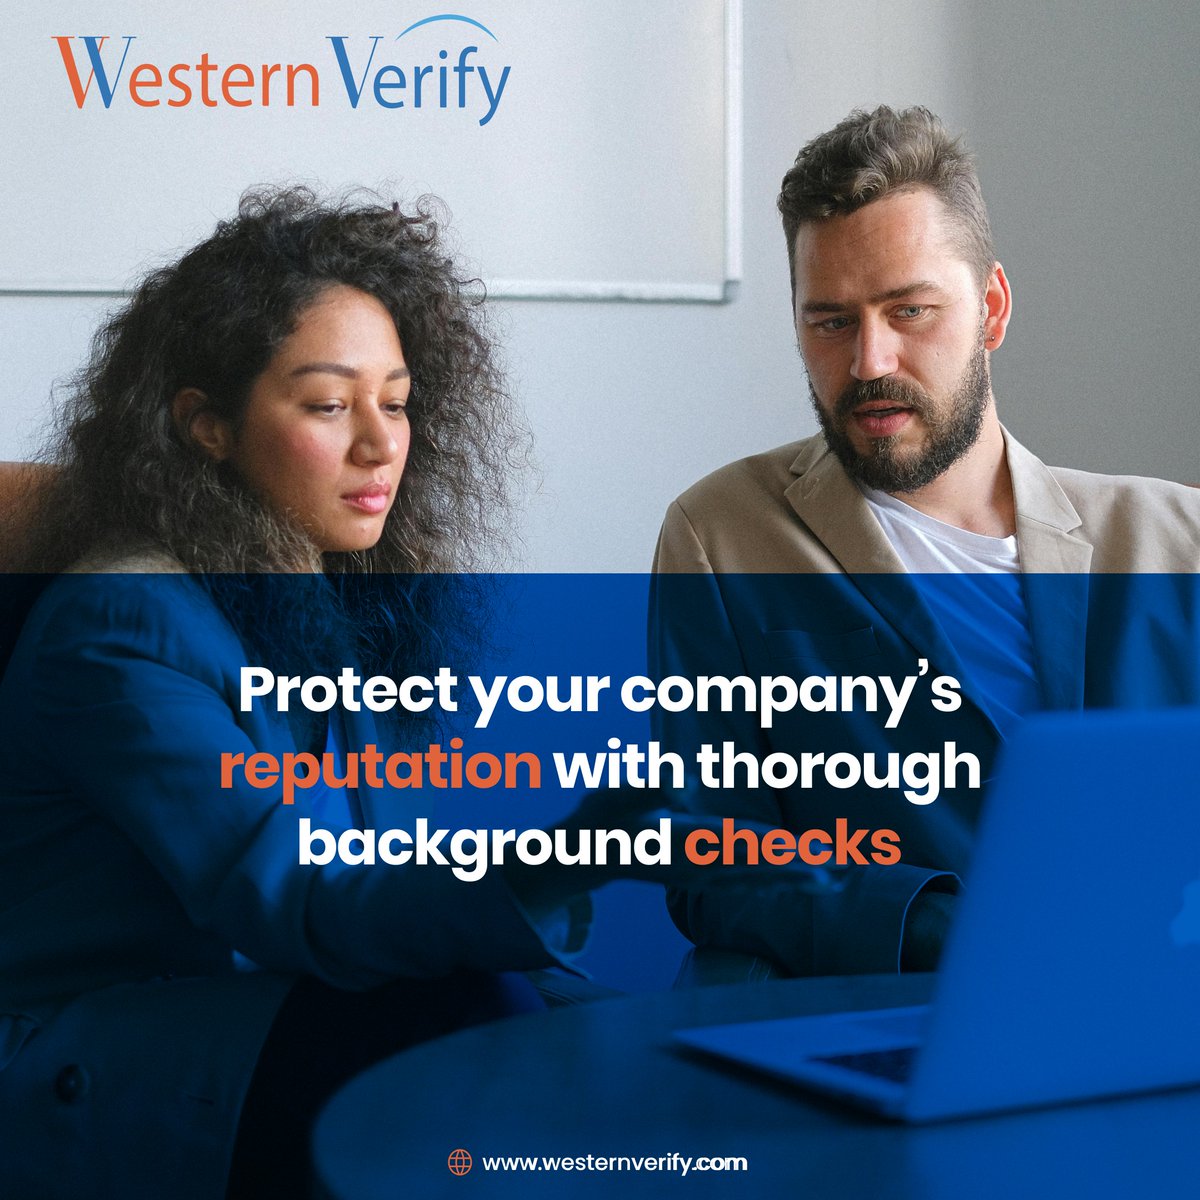 Every interaction your company has effects your company's reputation. Protect your company's reputation by conducting thorough background checks. 

Explore our screening solutions today: westernverify.com/employment-scr… 

#ReferenceCheck #BackgroundScreening #HiringProcess #HR